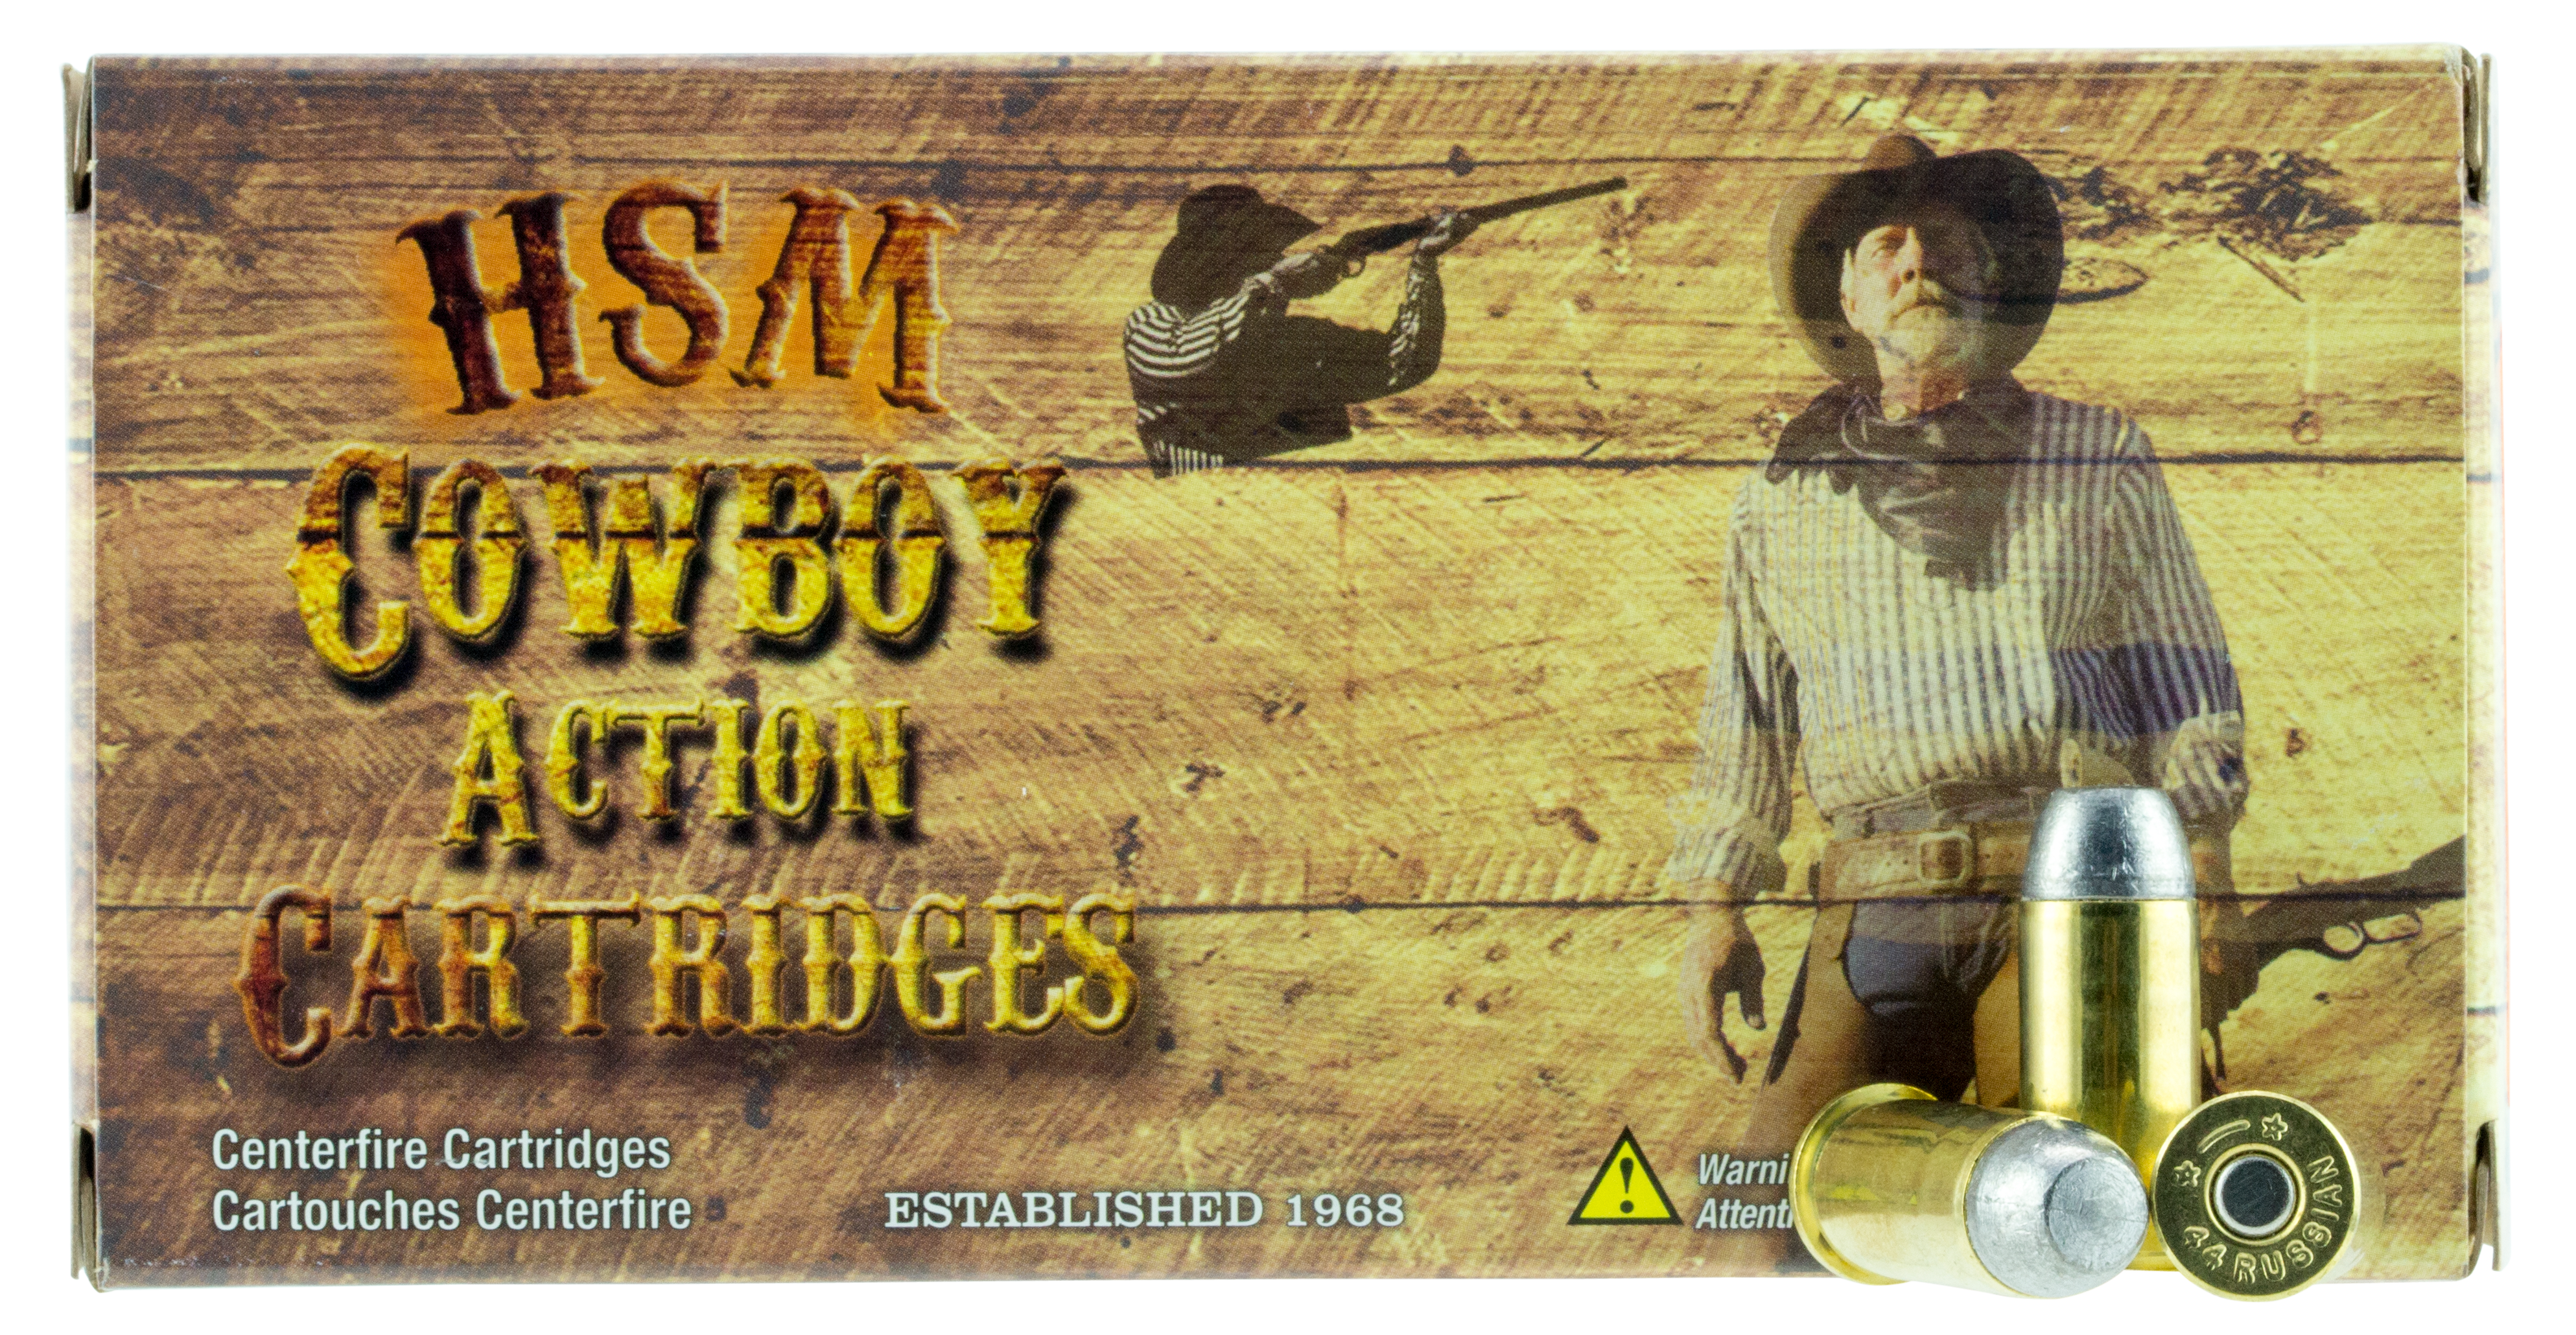 HSM Cowboy Action RNFP Ammo